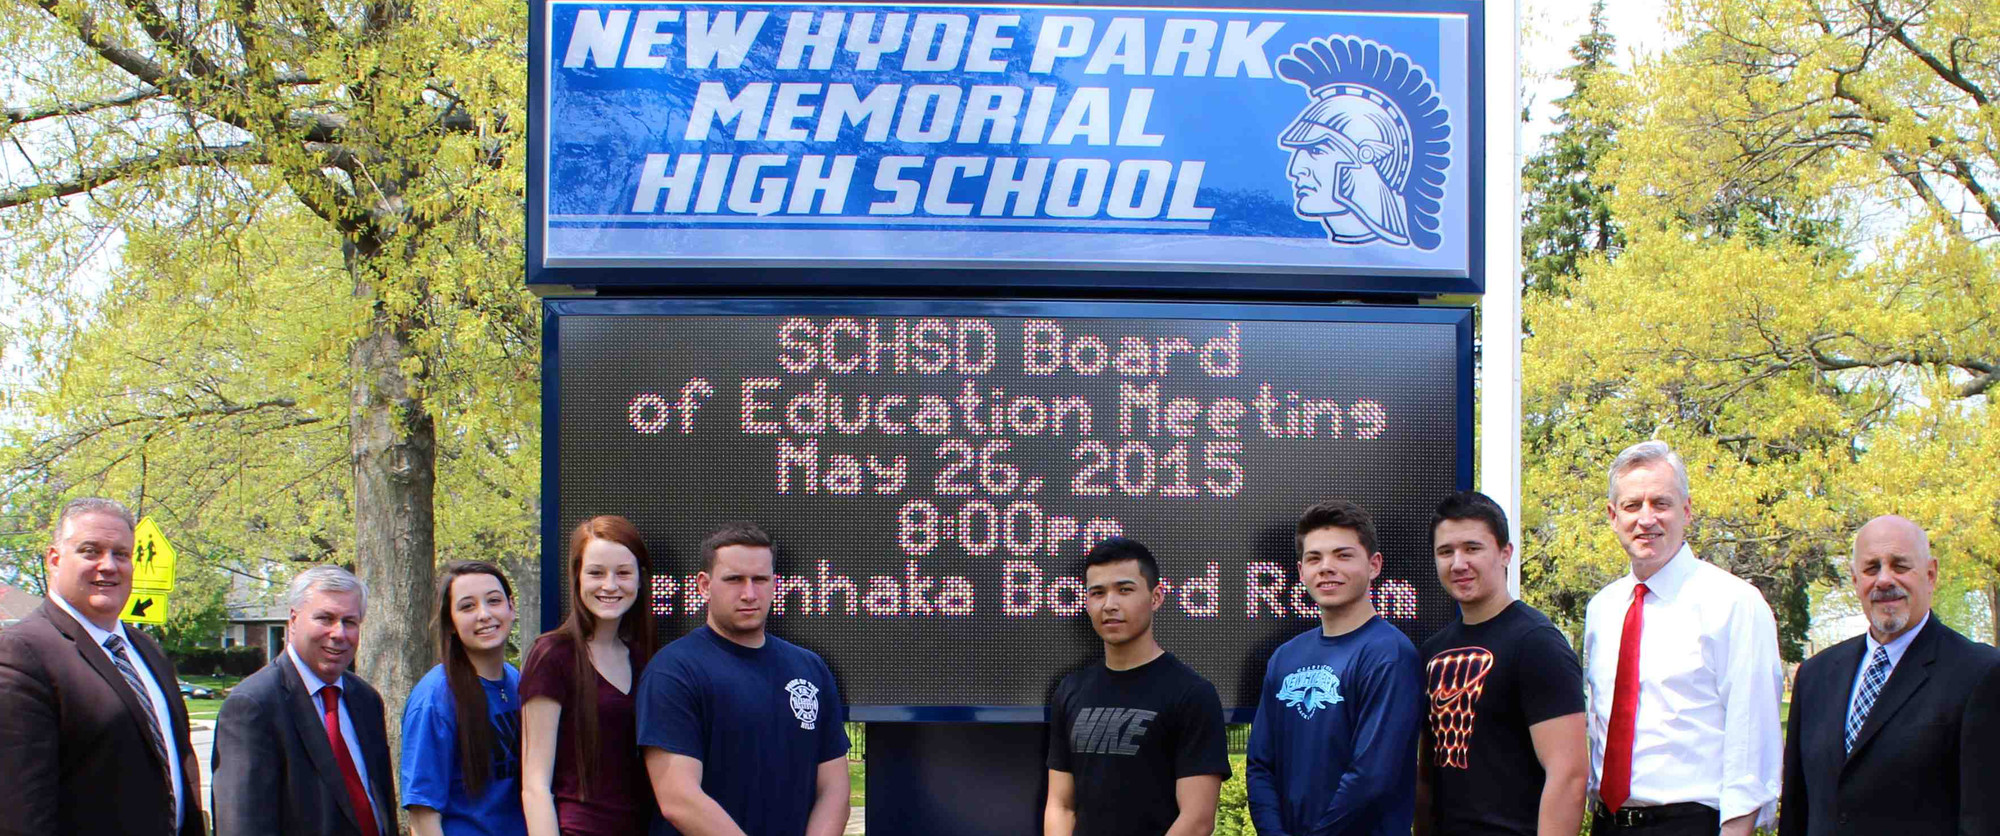 New Hyde Park students are pictured with Principal Dr. Richard Faccio, left, Sewanhaka Central High School District Board of Education President David Fowler, second left, Legislator Richard J. Nicolello and Sewanhaka Central High School Superintendent of Schools Dr. Ralph Ferrie.